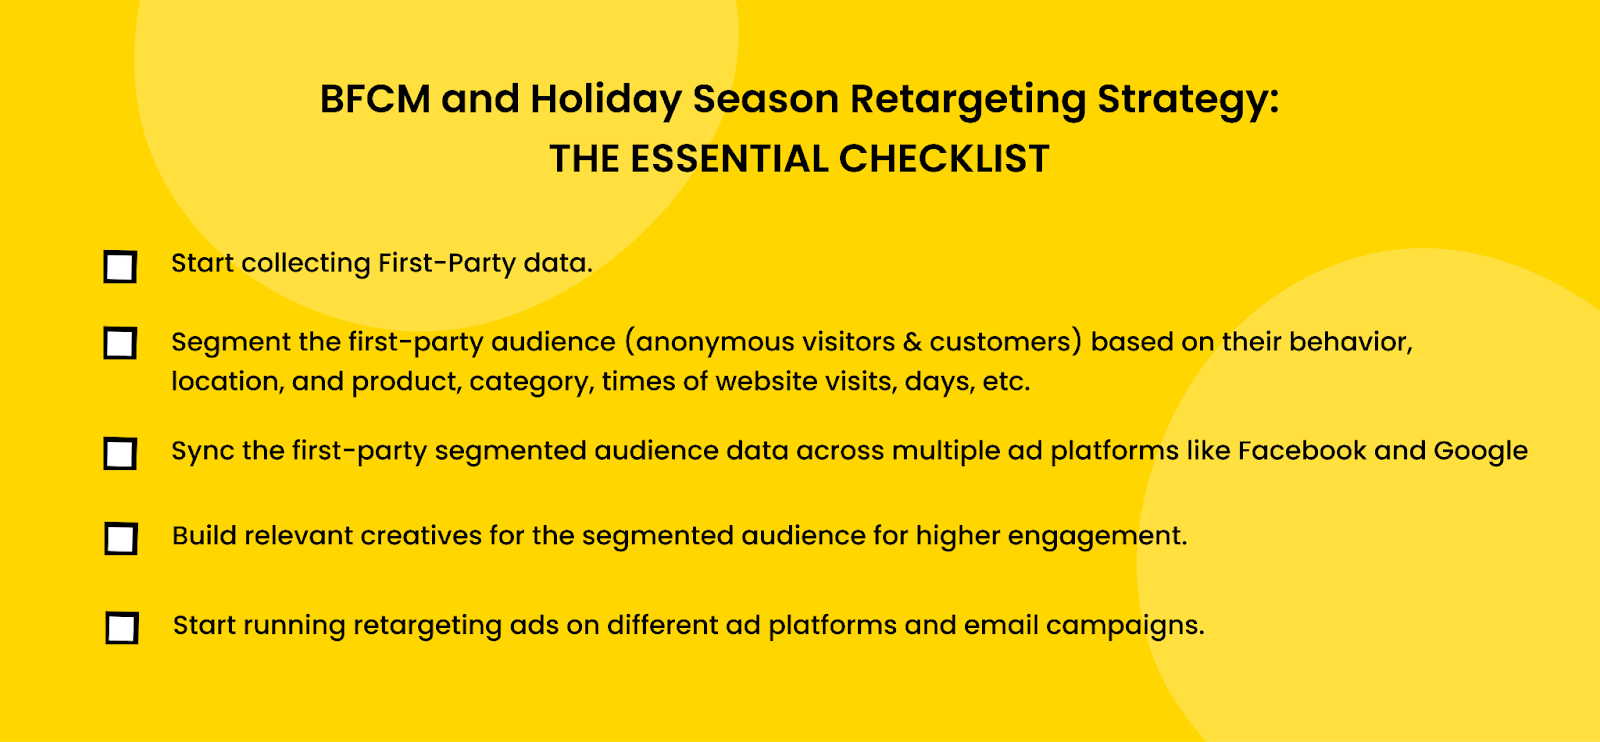 BFCM and Holiday Season Retargeting Strategy: The Essential Checklist 